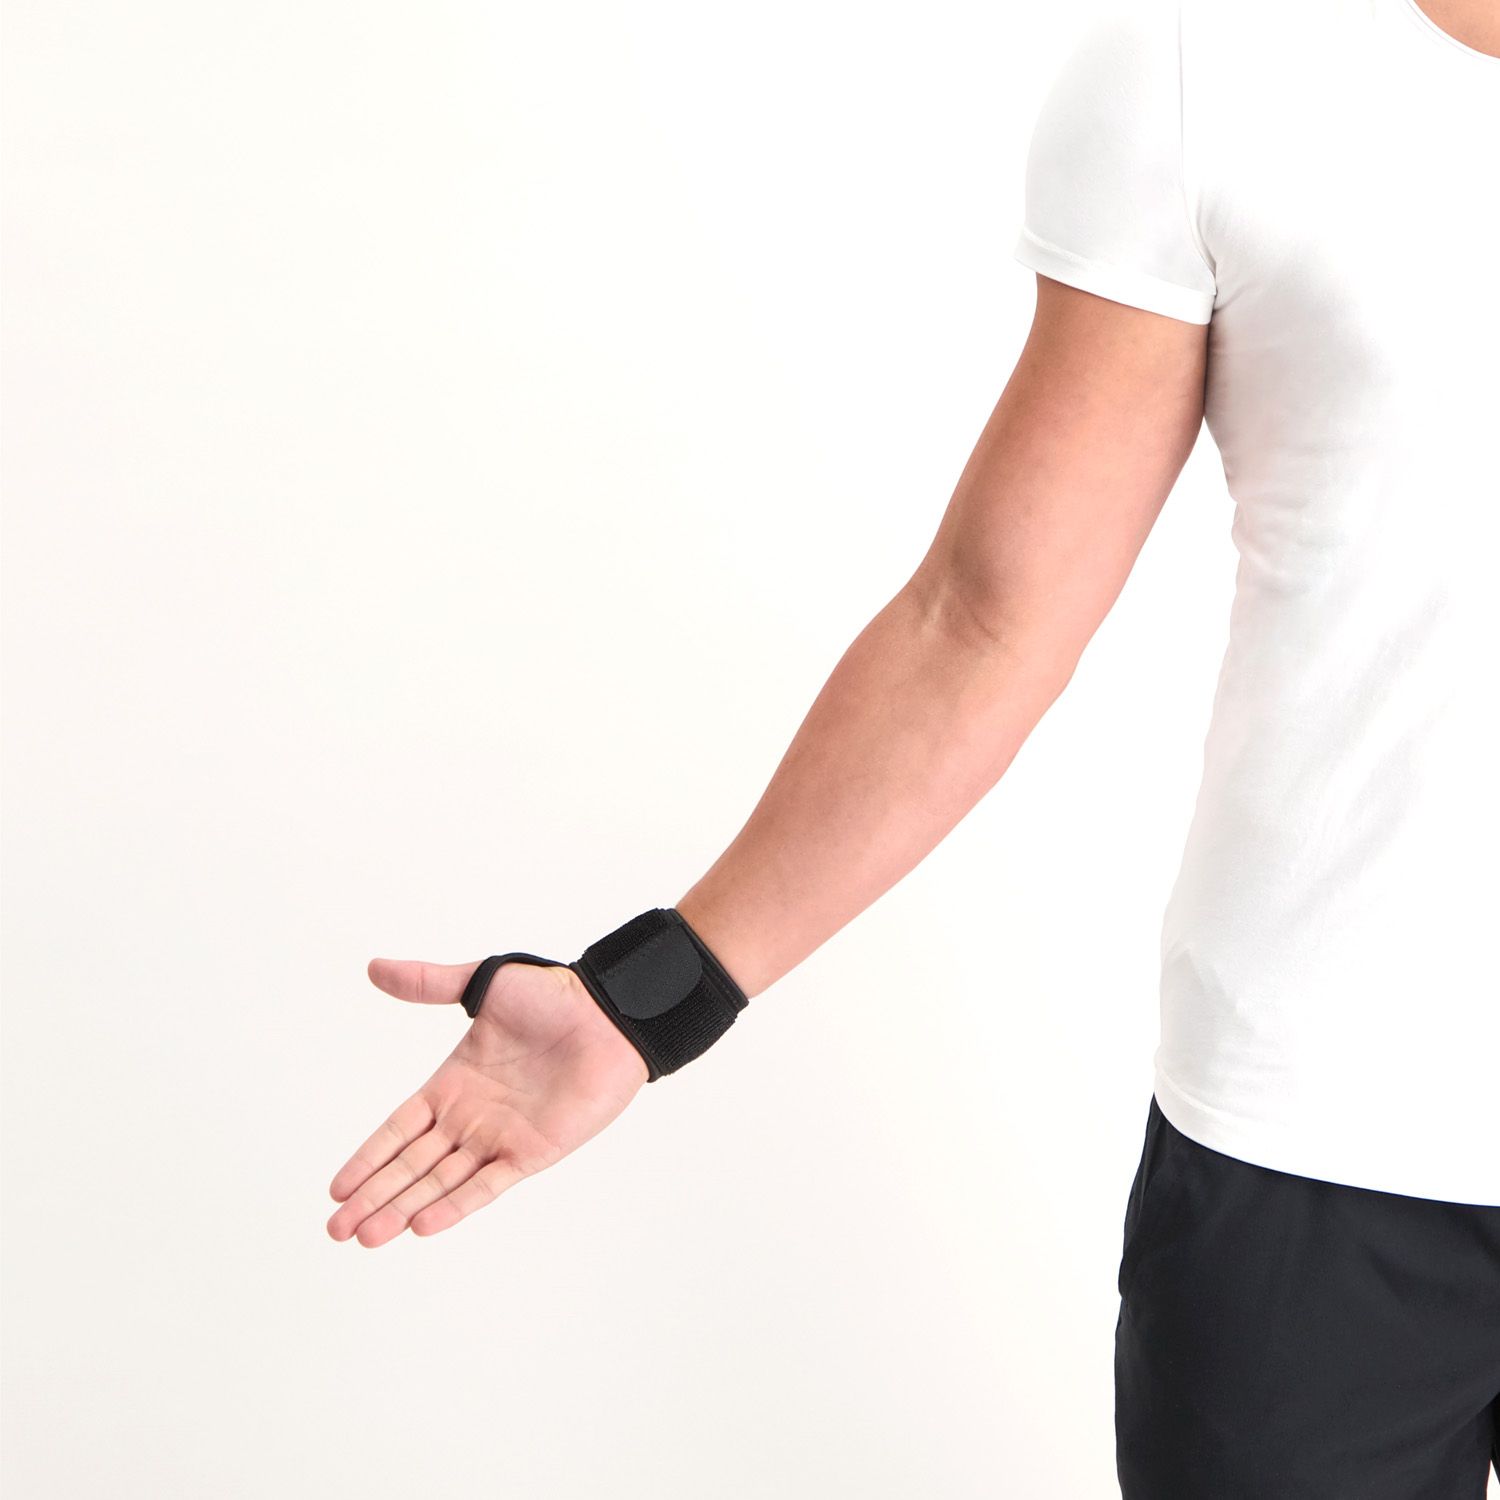 dunimed wrist support zoomed out